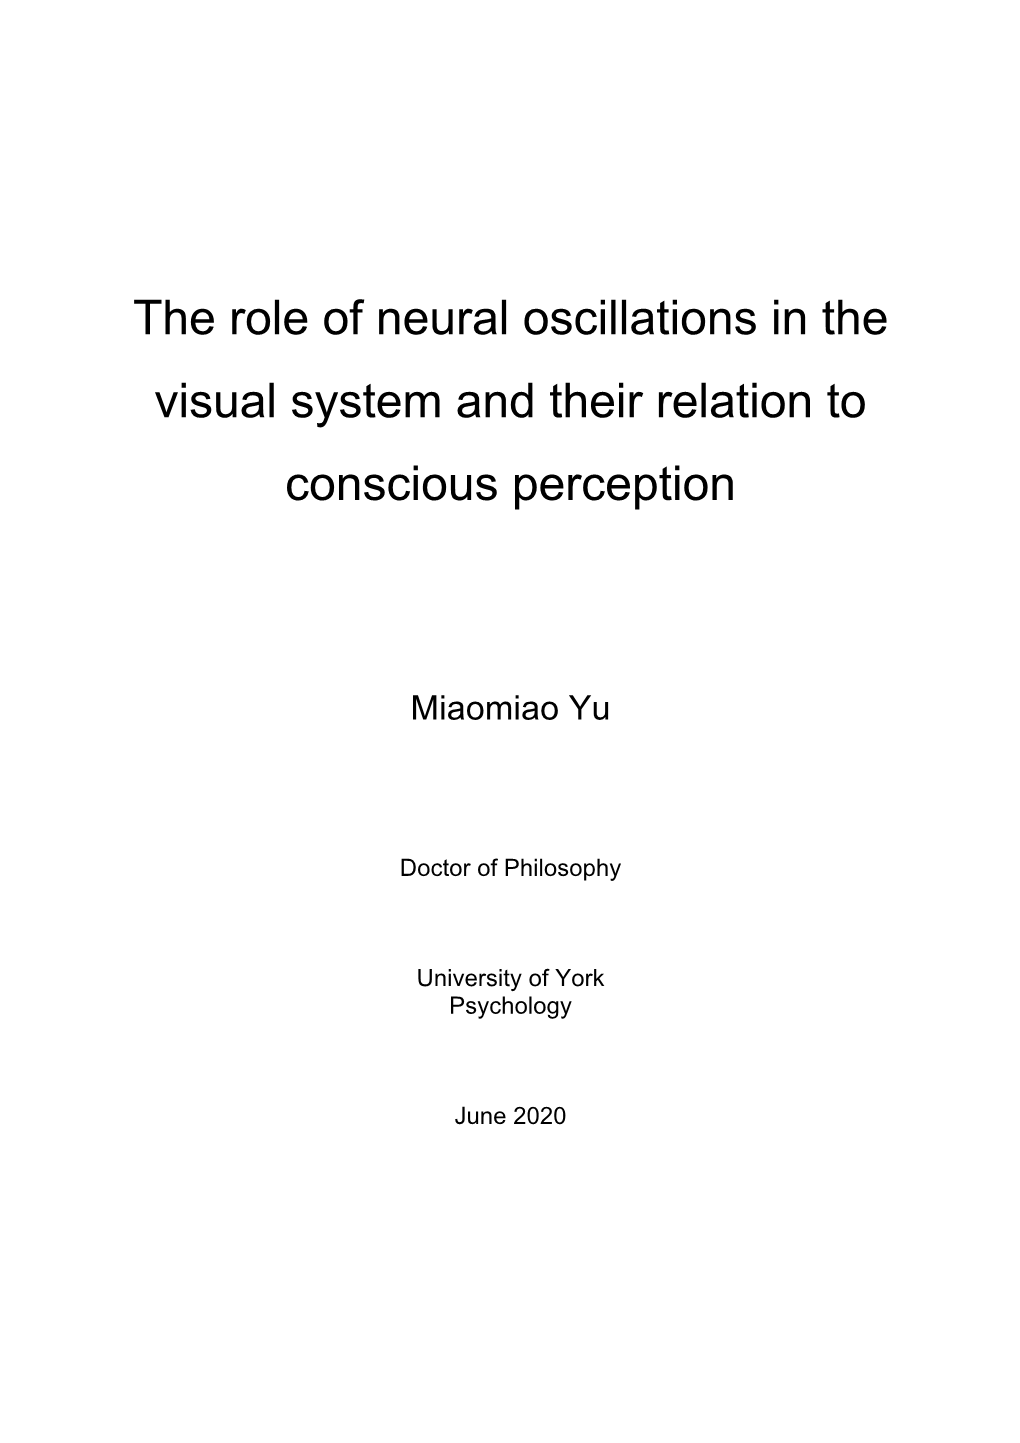 The Role of Neural Oscillations in the Visual System and Their Relation to Conscious Perception